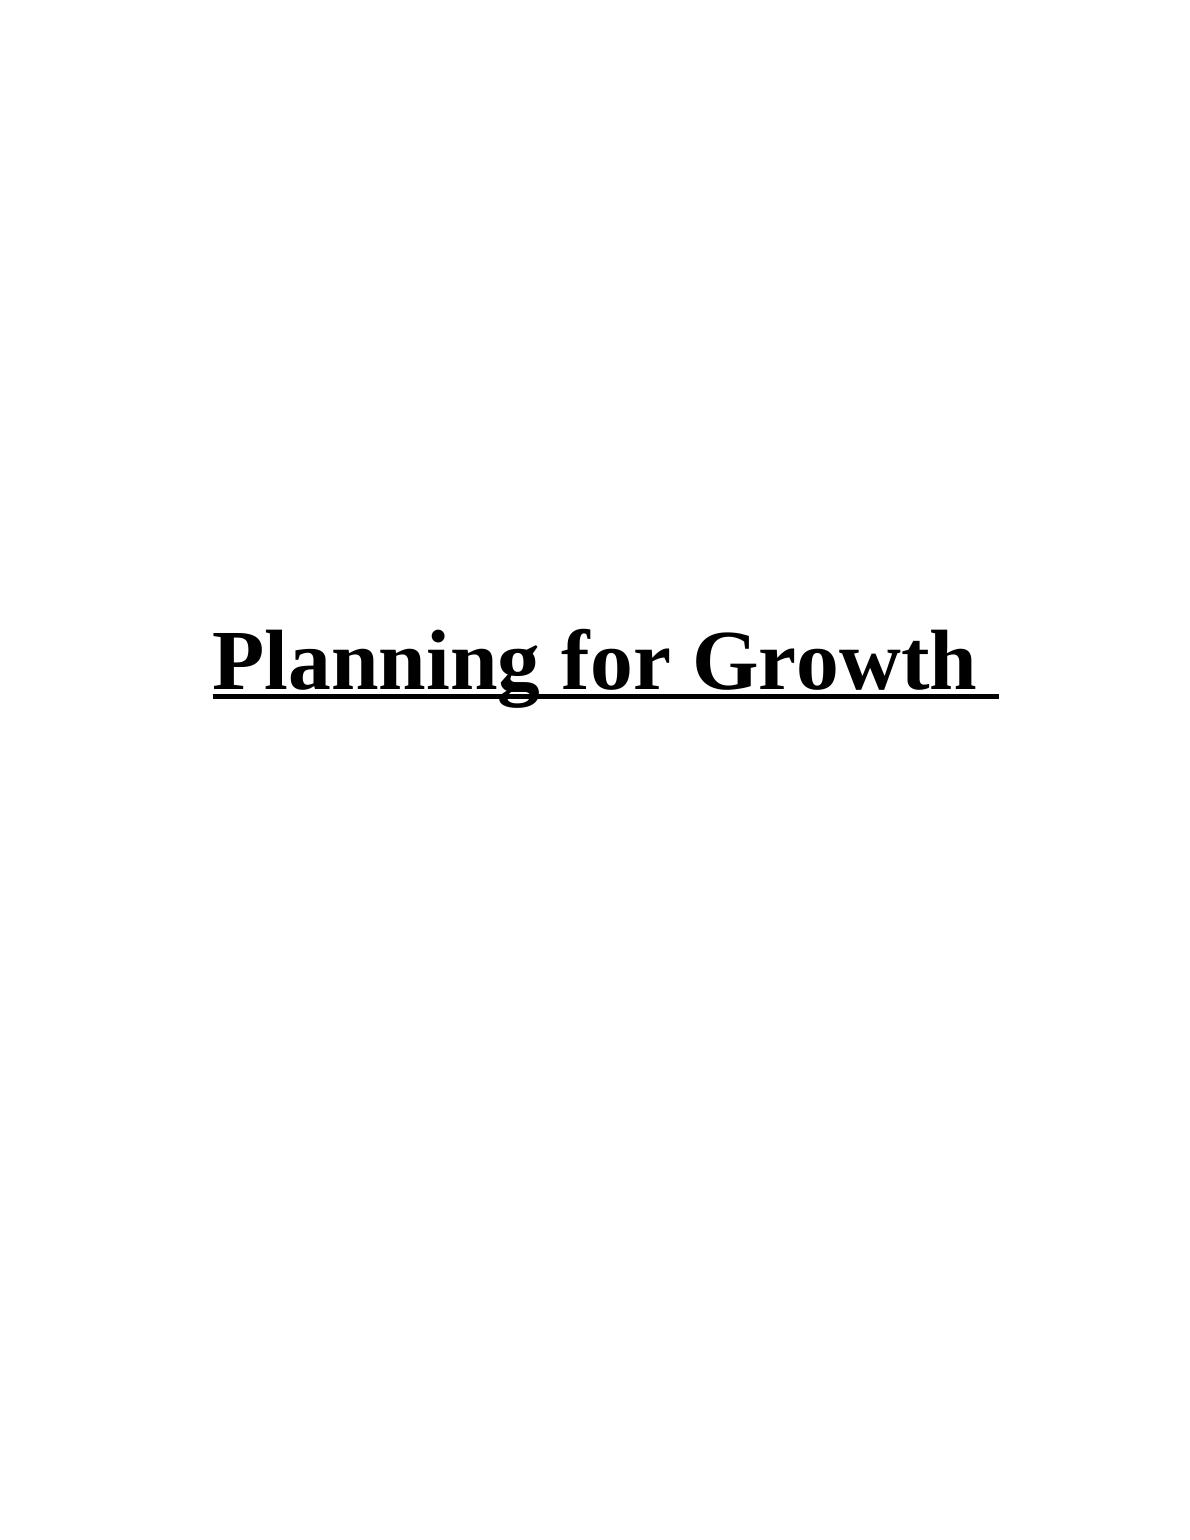 Planning for Growth Evaluate Opportunities_1